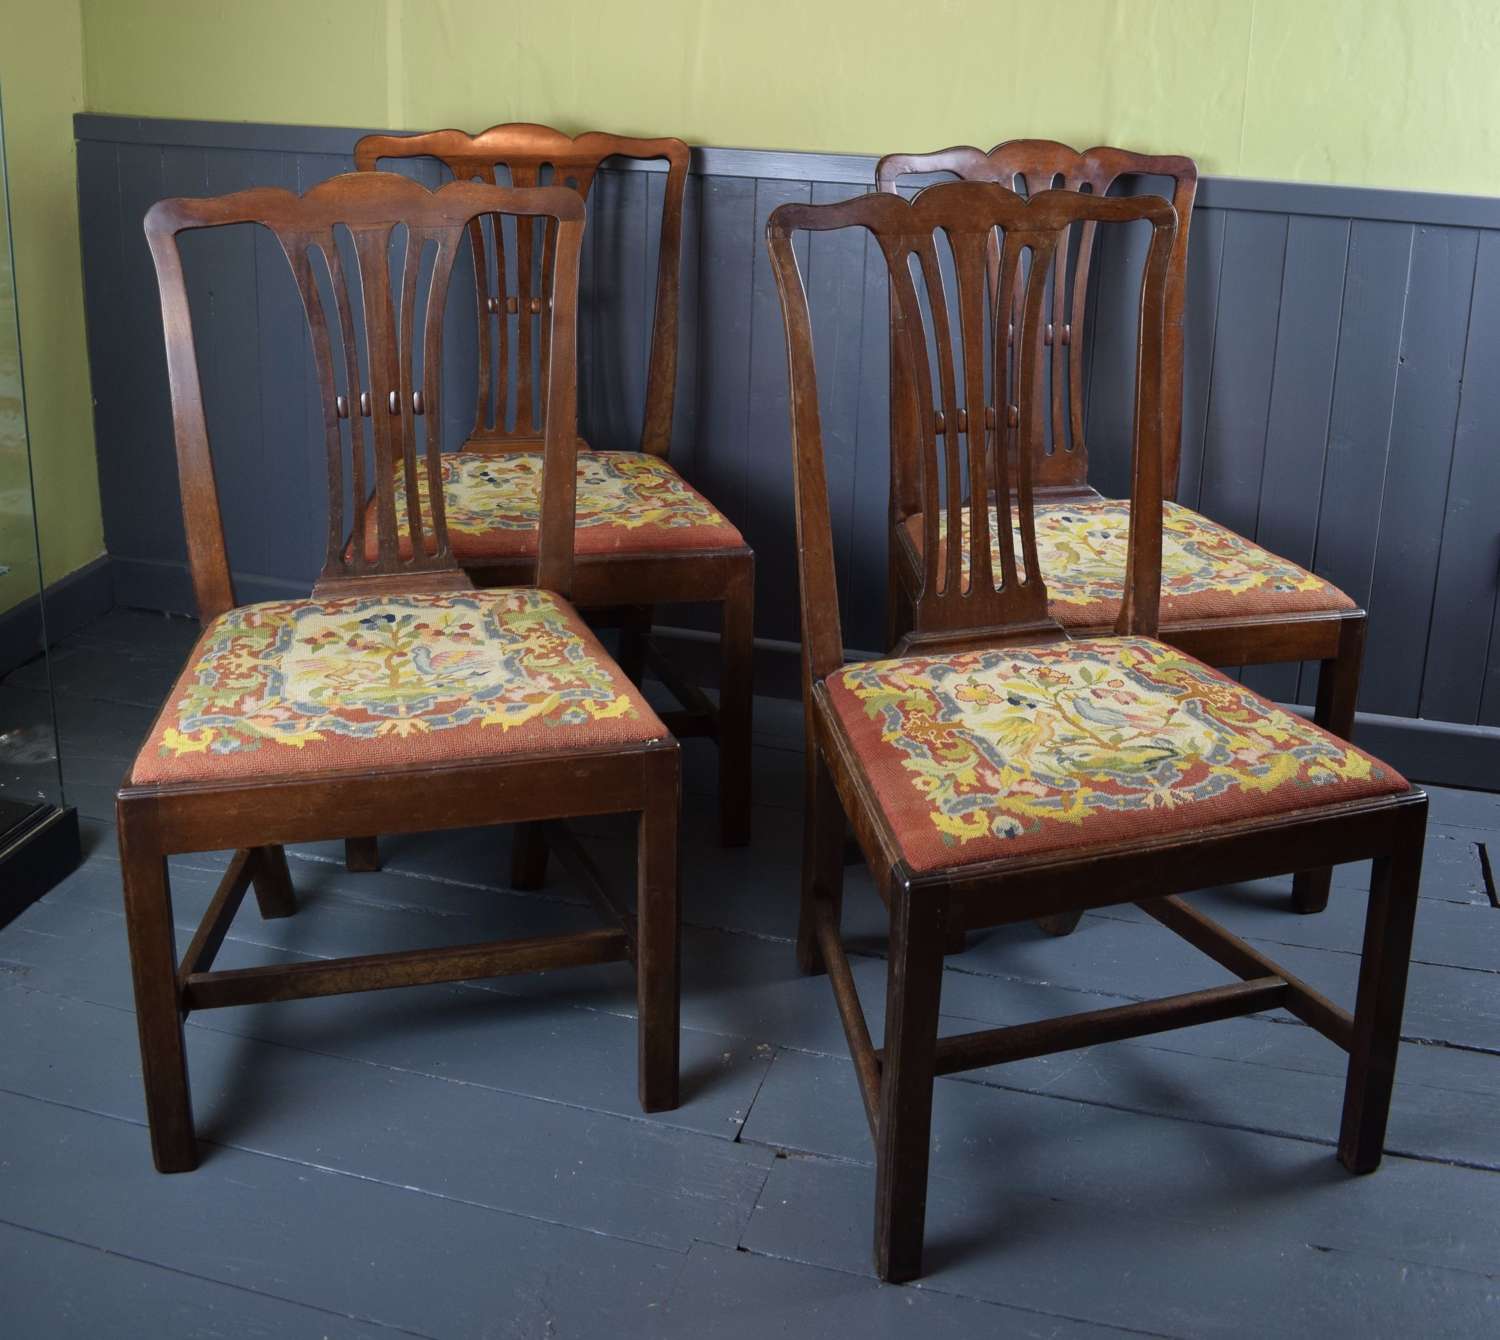 George III Mahogany Dining Chairs with Needlework Seats